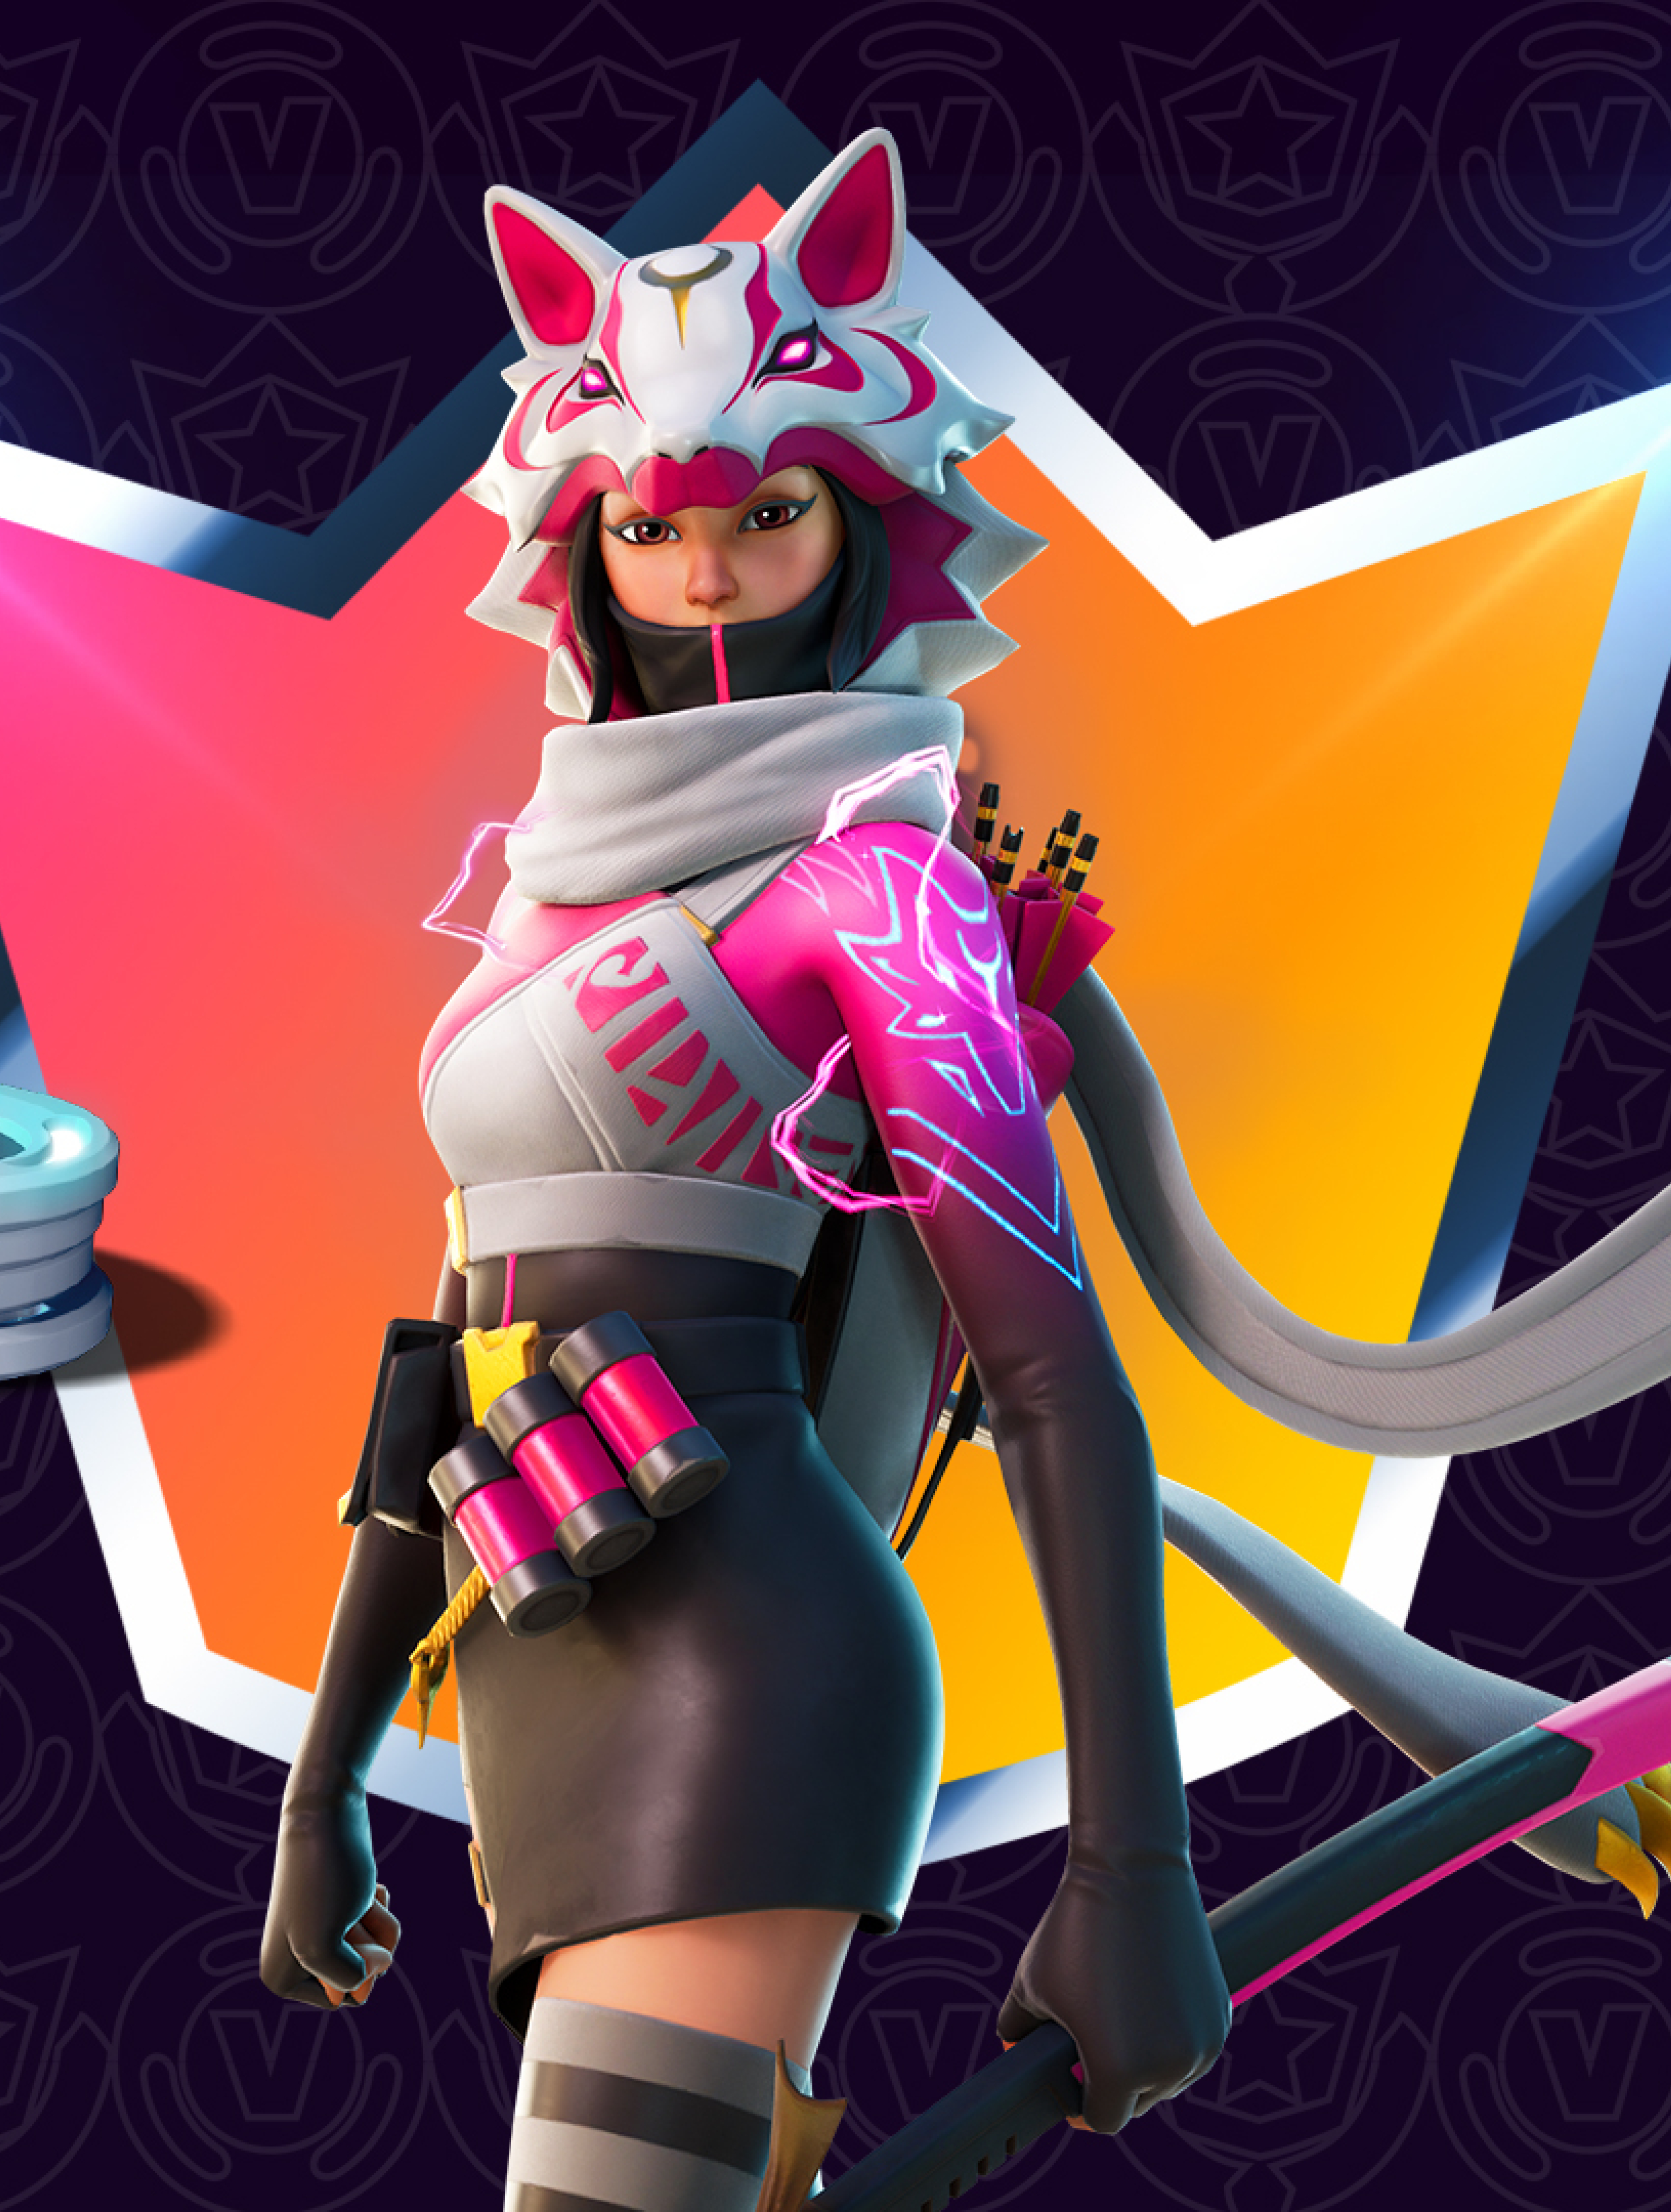 305401 Fortnite, Drift and Catalyst, 4K - Rare Gallery HD Wallpapers